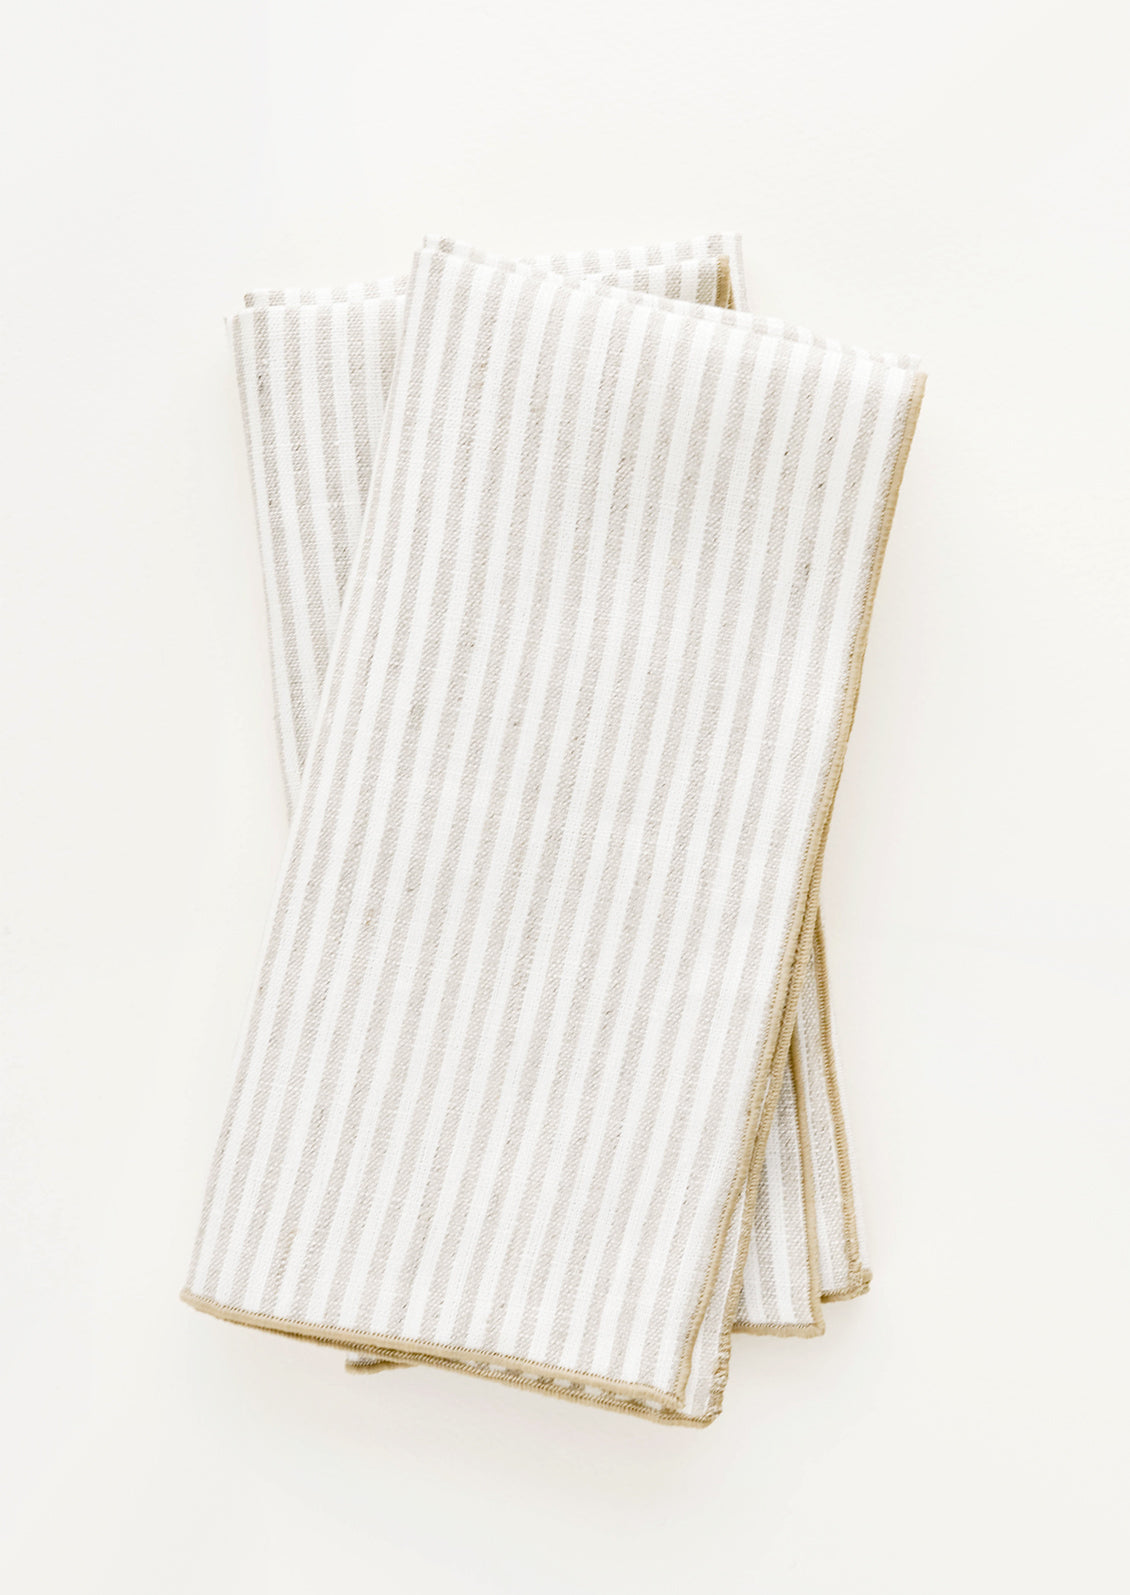 Pair of ivory folded Linen Napkins with light brown vertical stripe.